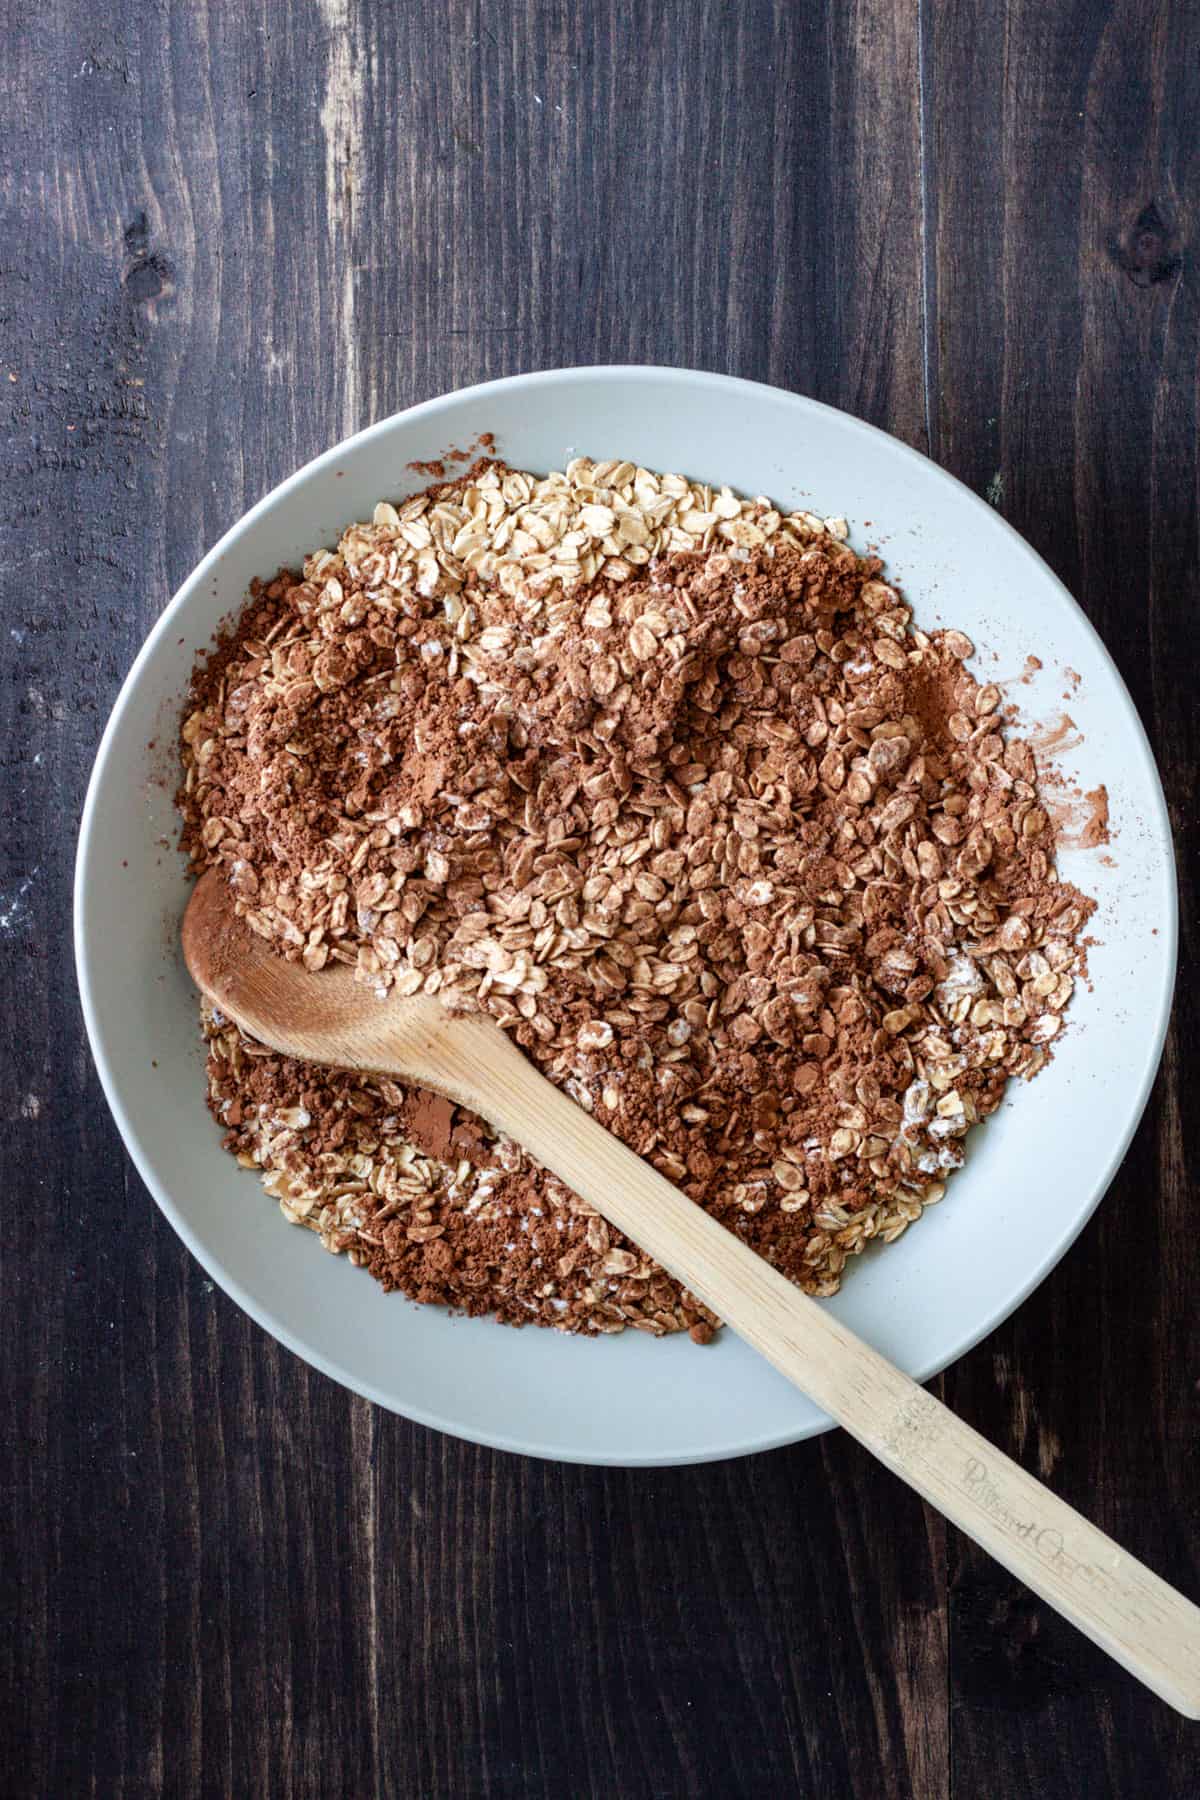 Oats and cocoa powder in a mixing bowl with a wooden spoon getting ready to mix it all together.